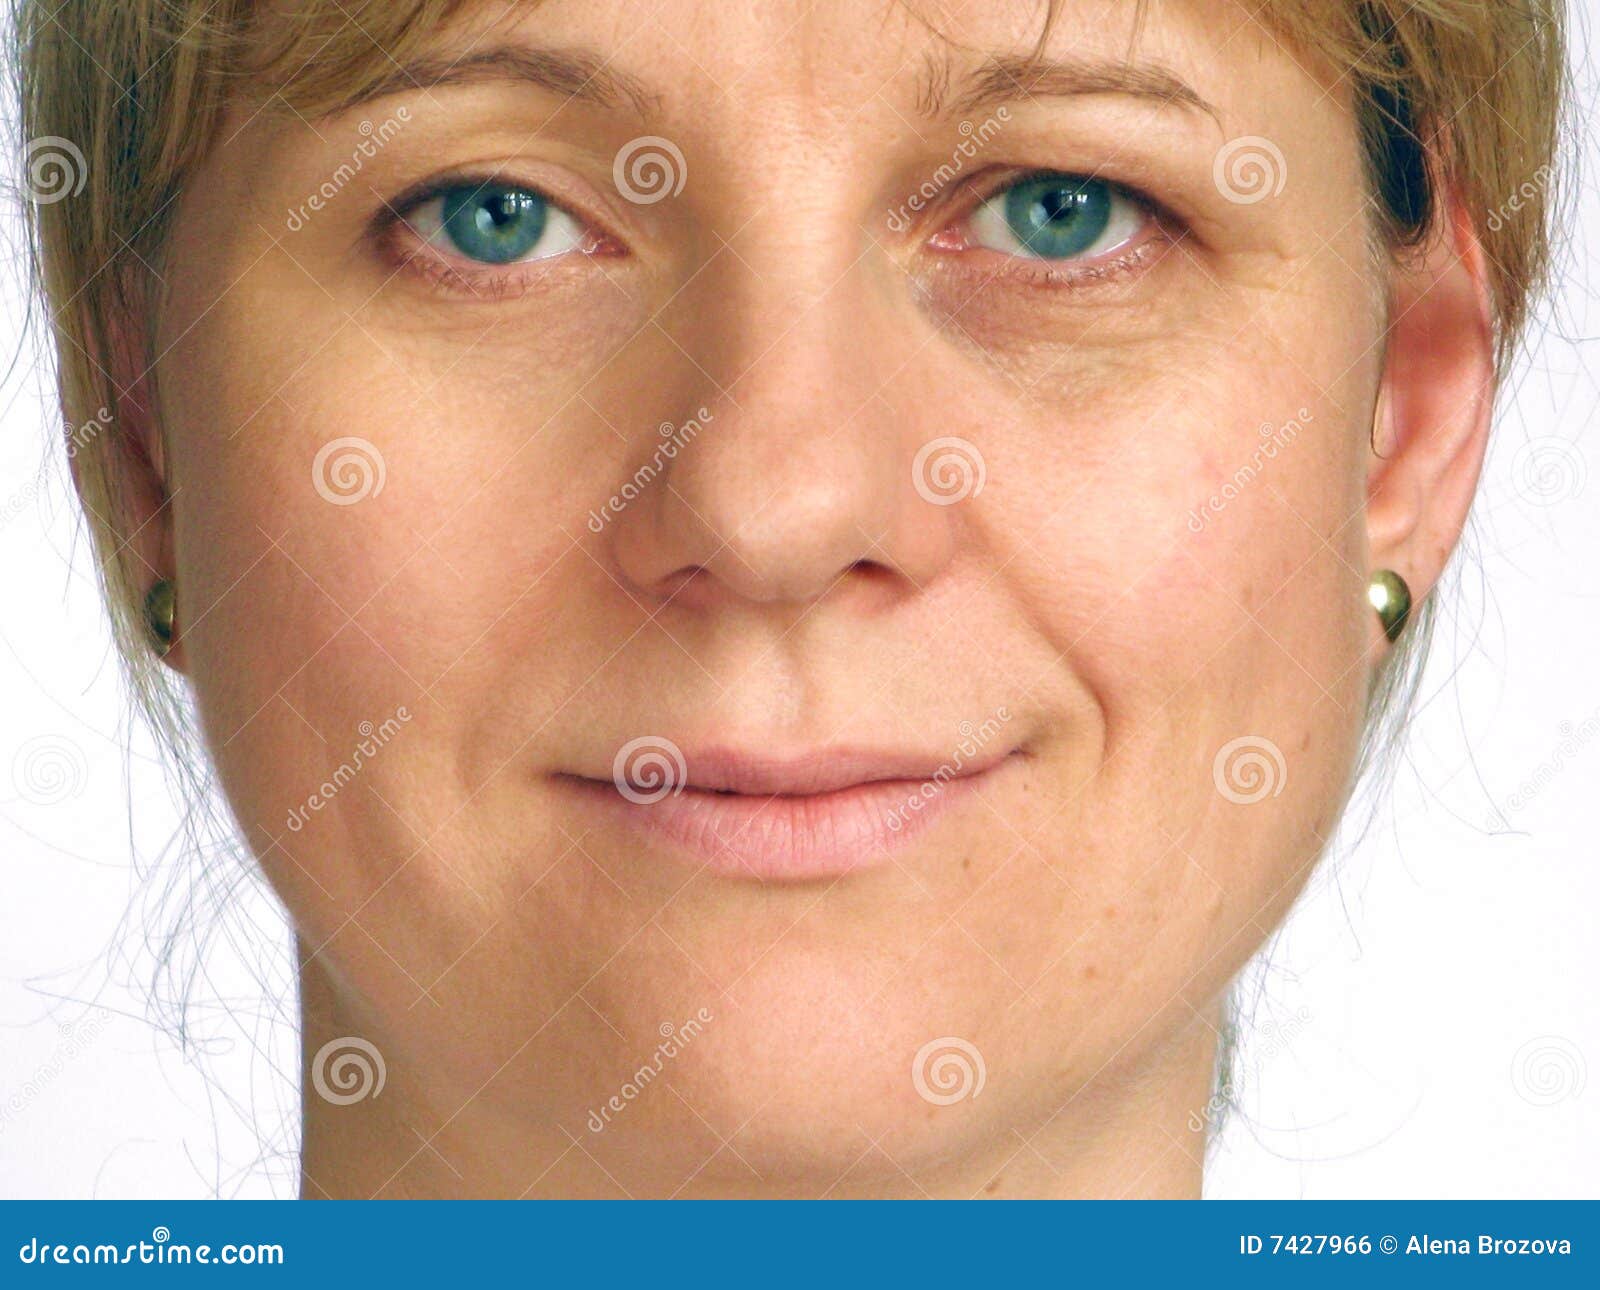 correction of wrinkles on half of face